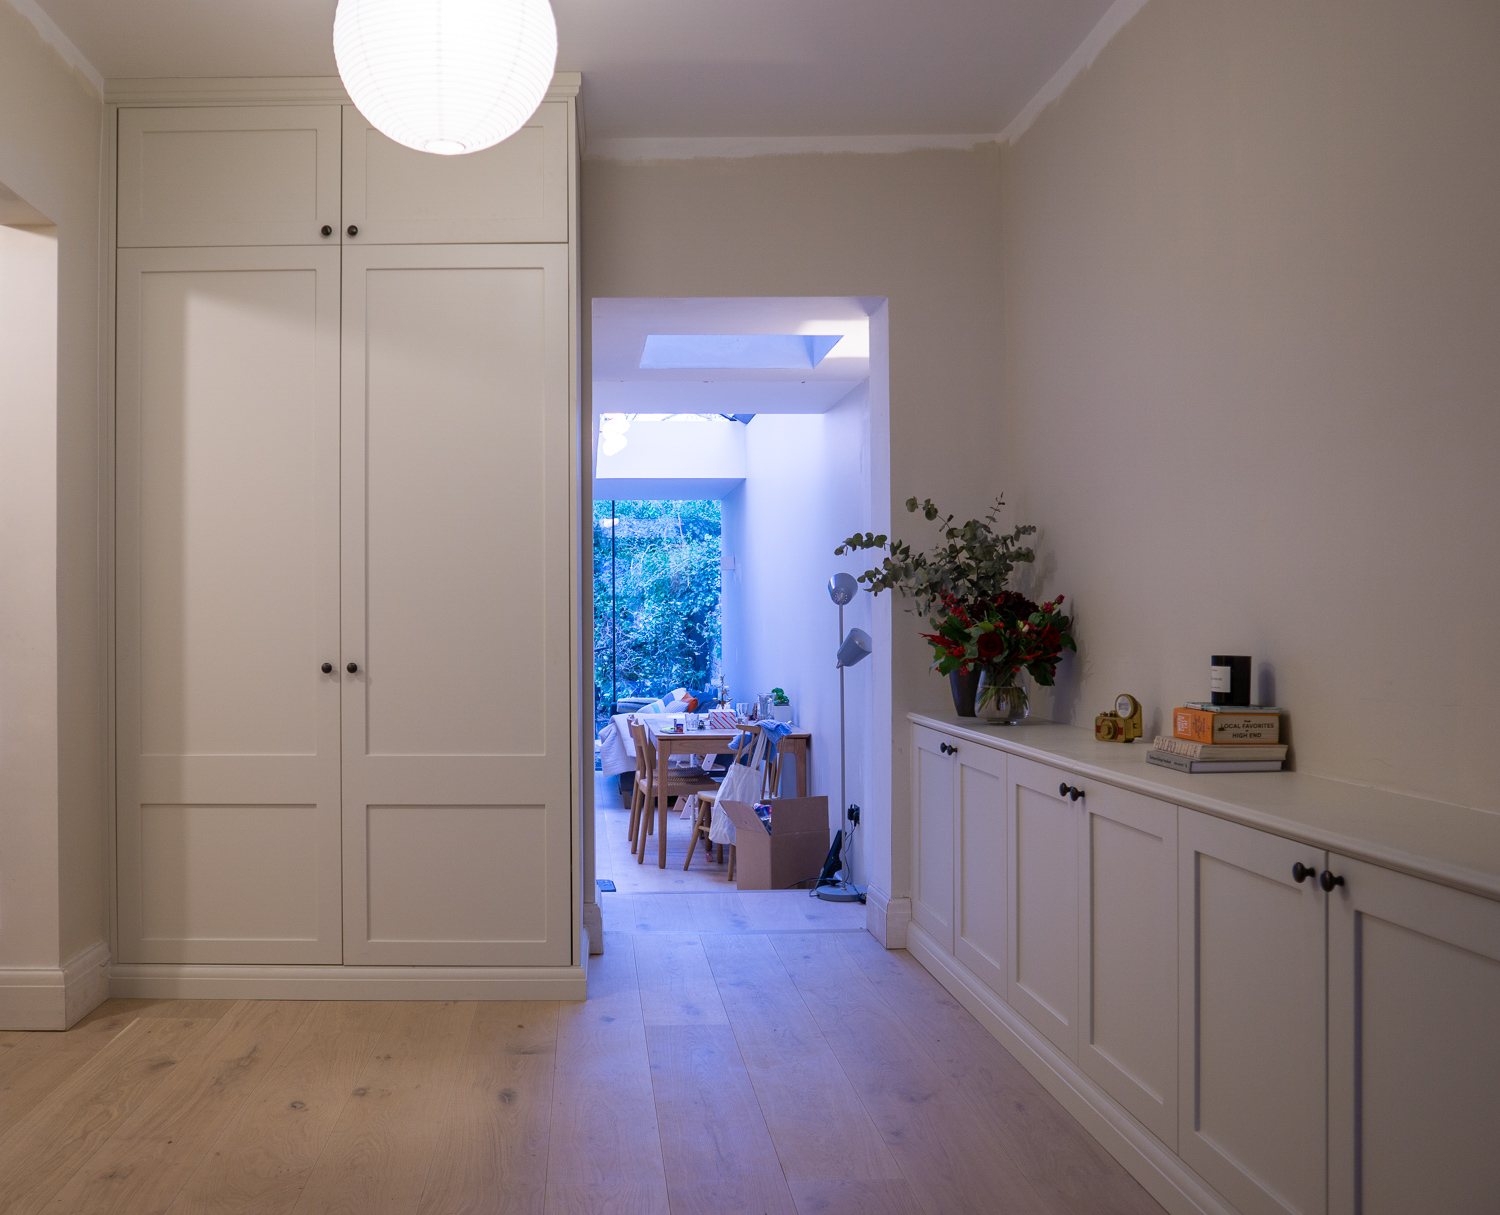 TENNYSON ROAD, Lounge storage with oversize built in wardrobe
